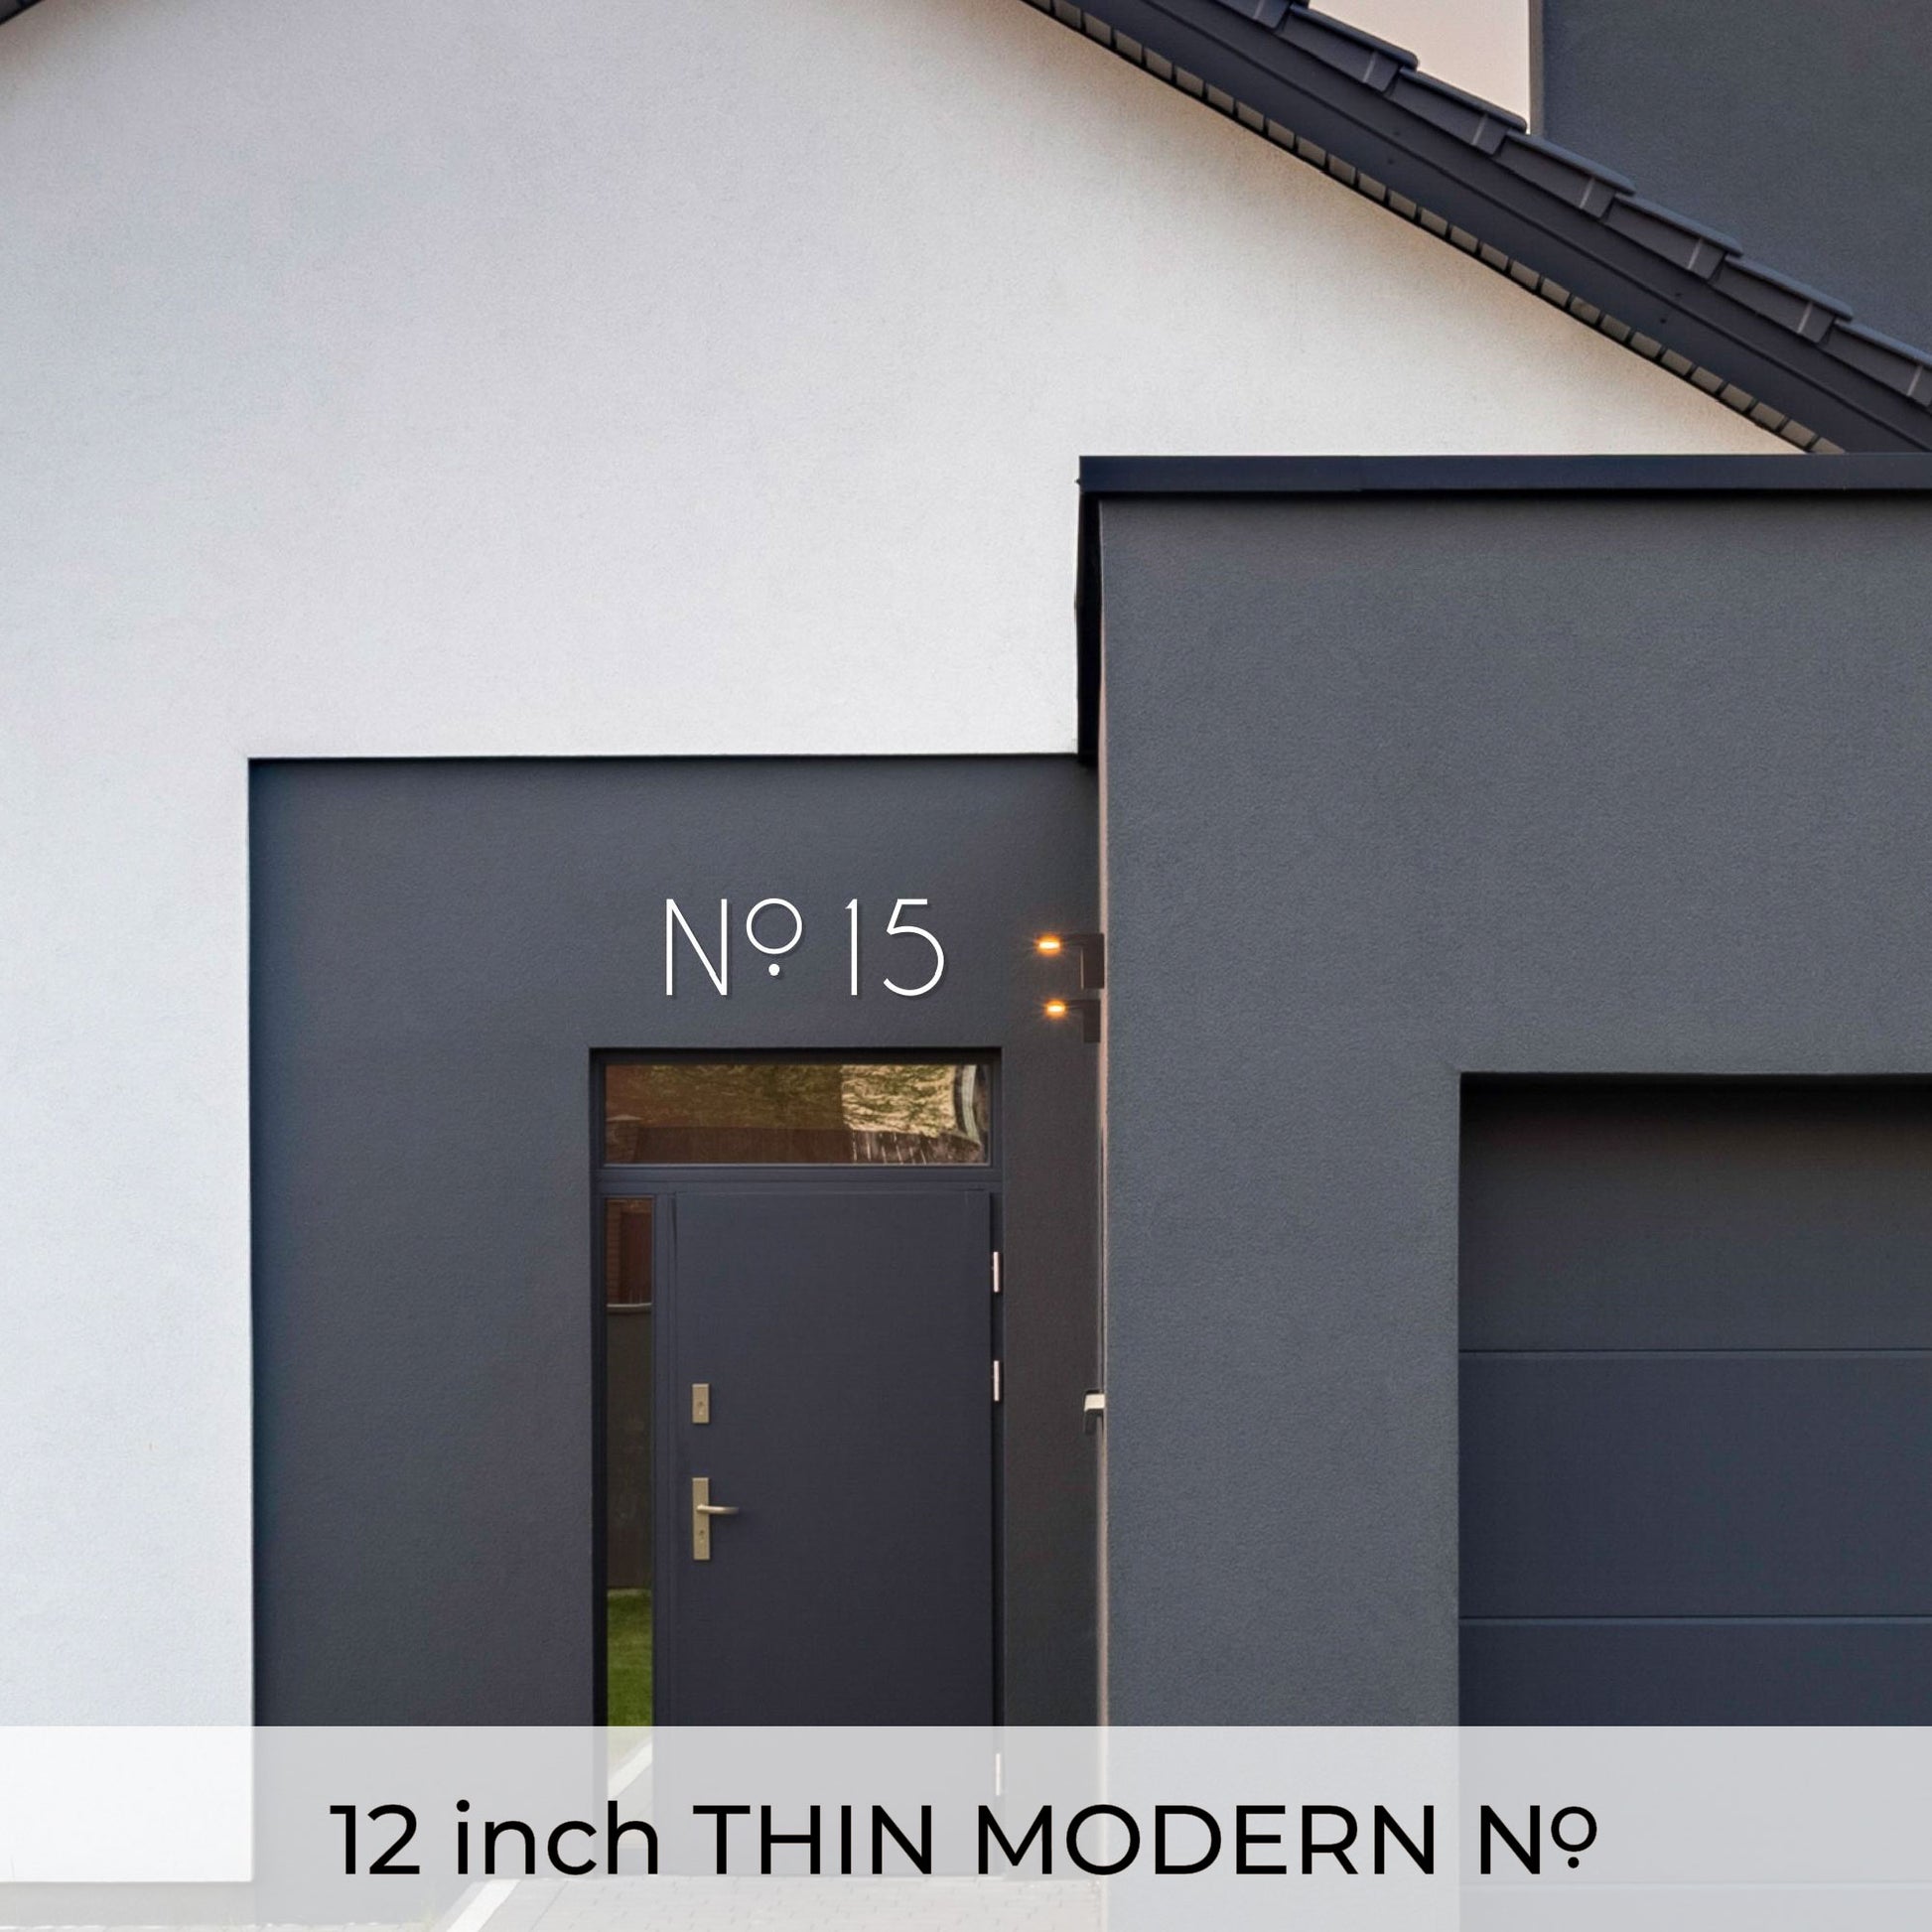 white THIN MODERN house numbers and No letters